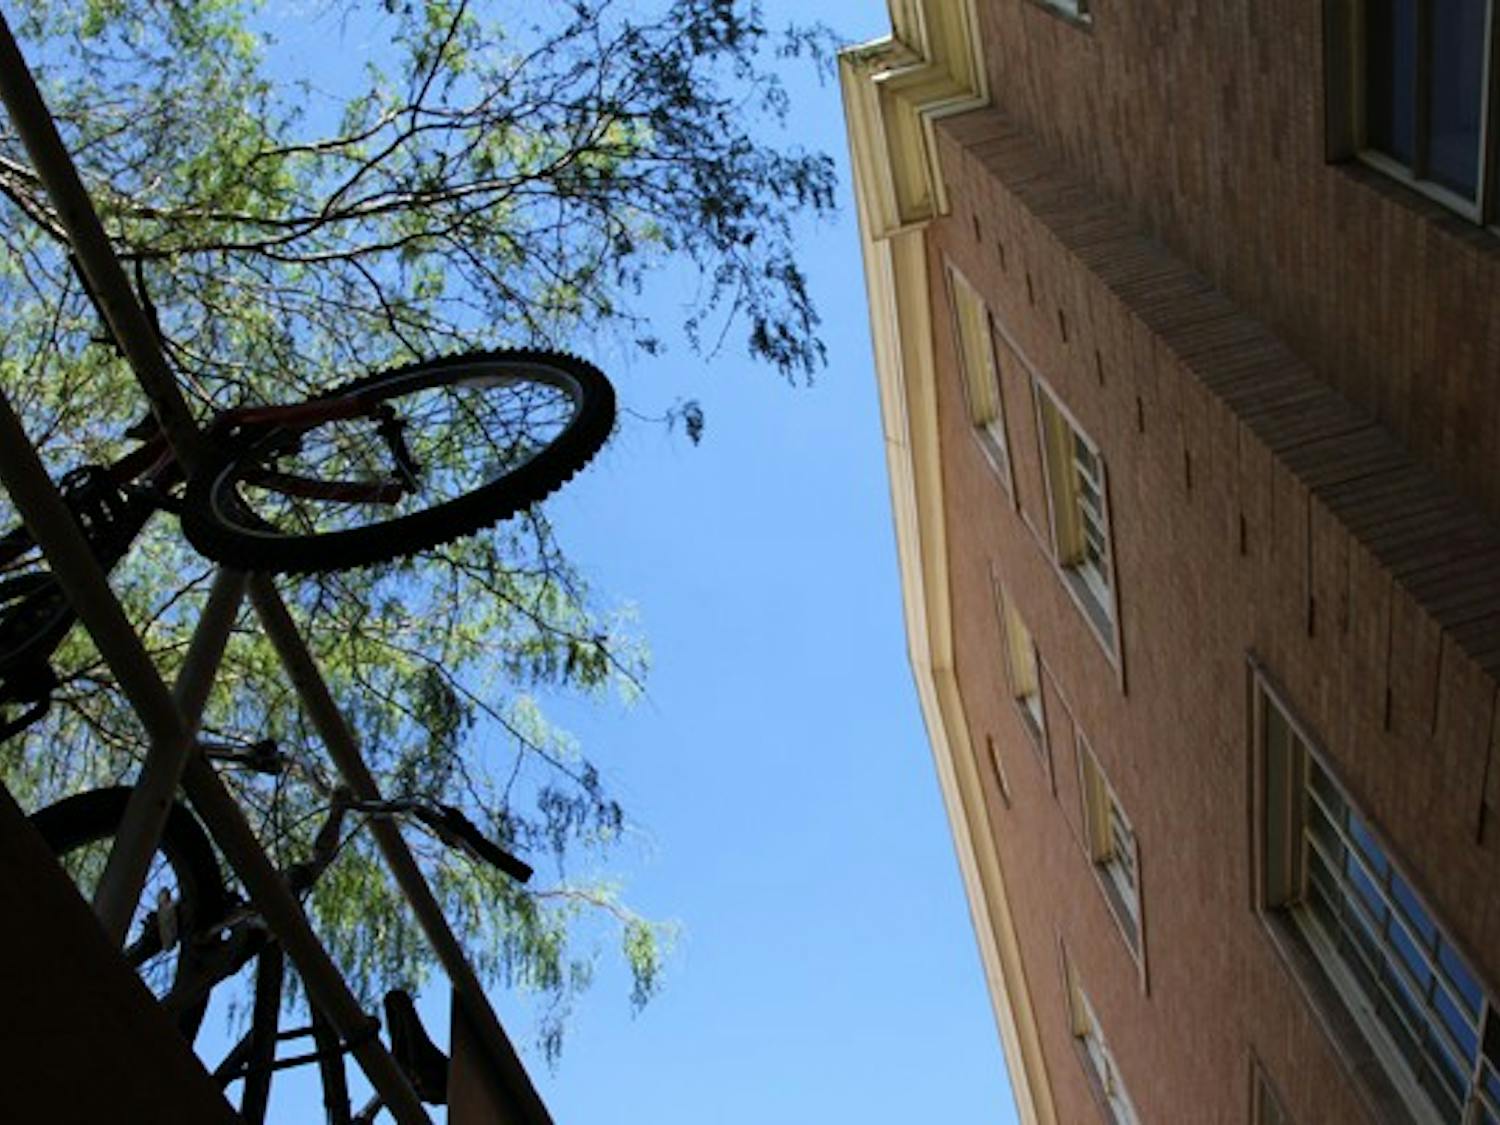 SUSPENDING BIKES: Bikes hang over the rails outside of Matthews Hall in Tempe last Wednesday afternoon. (Photo by Rosie Gochnour)